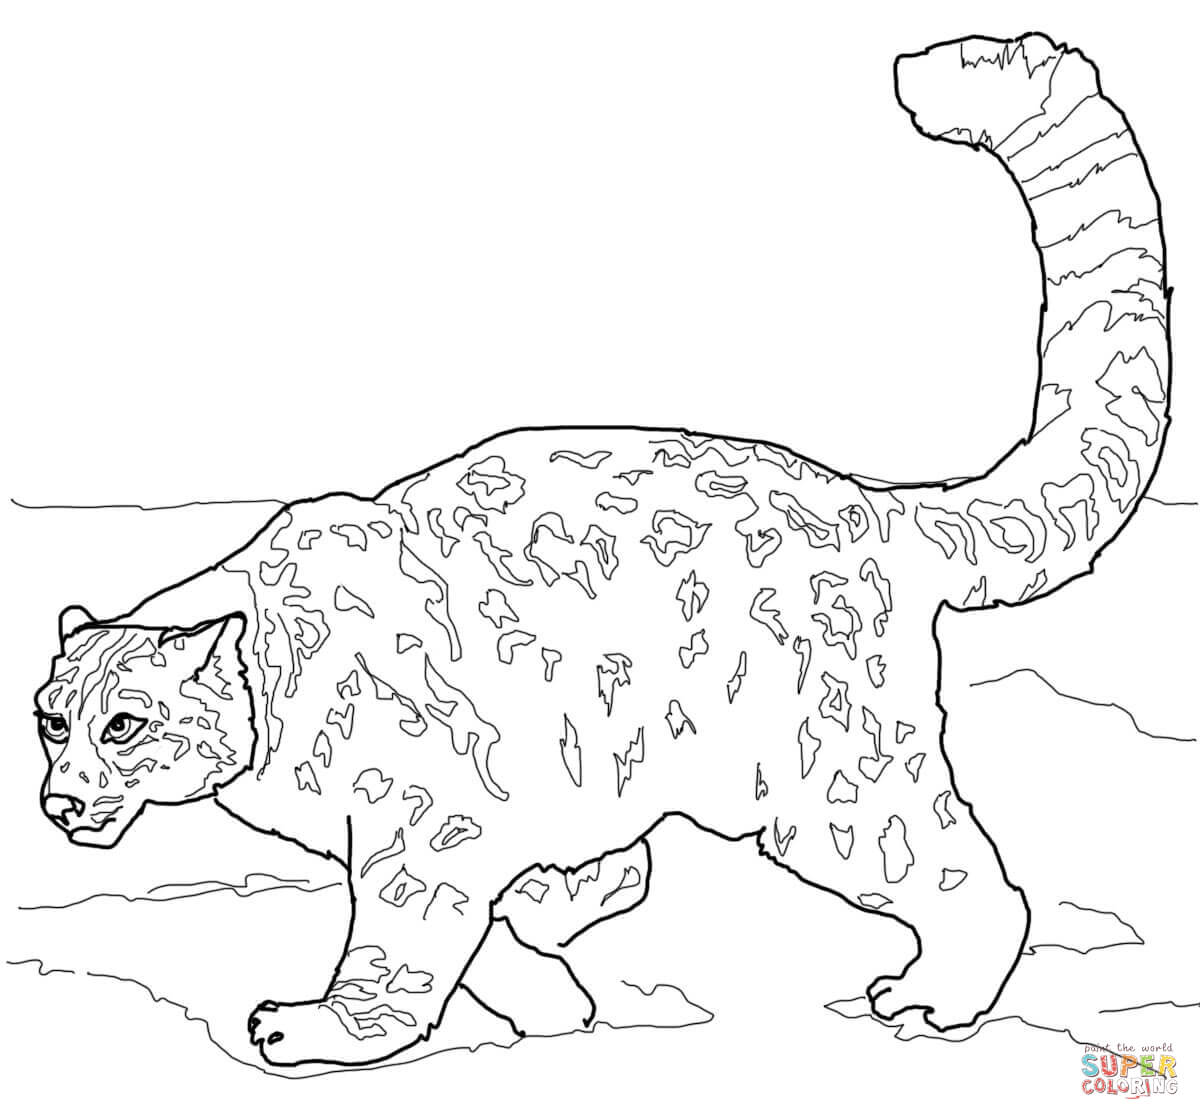 Leopards coloring pages | Free Coloring Pages